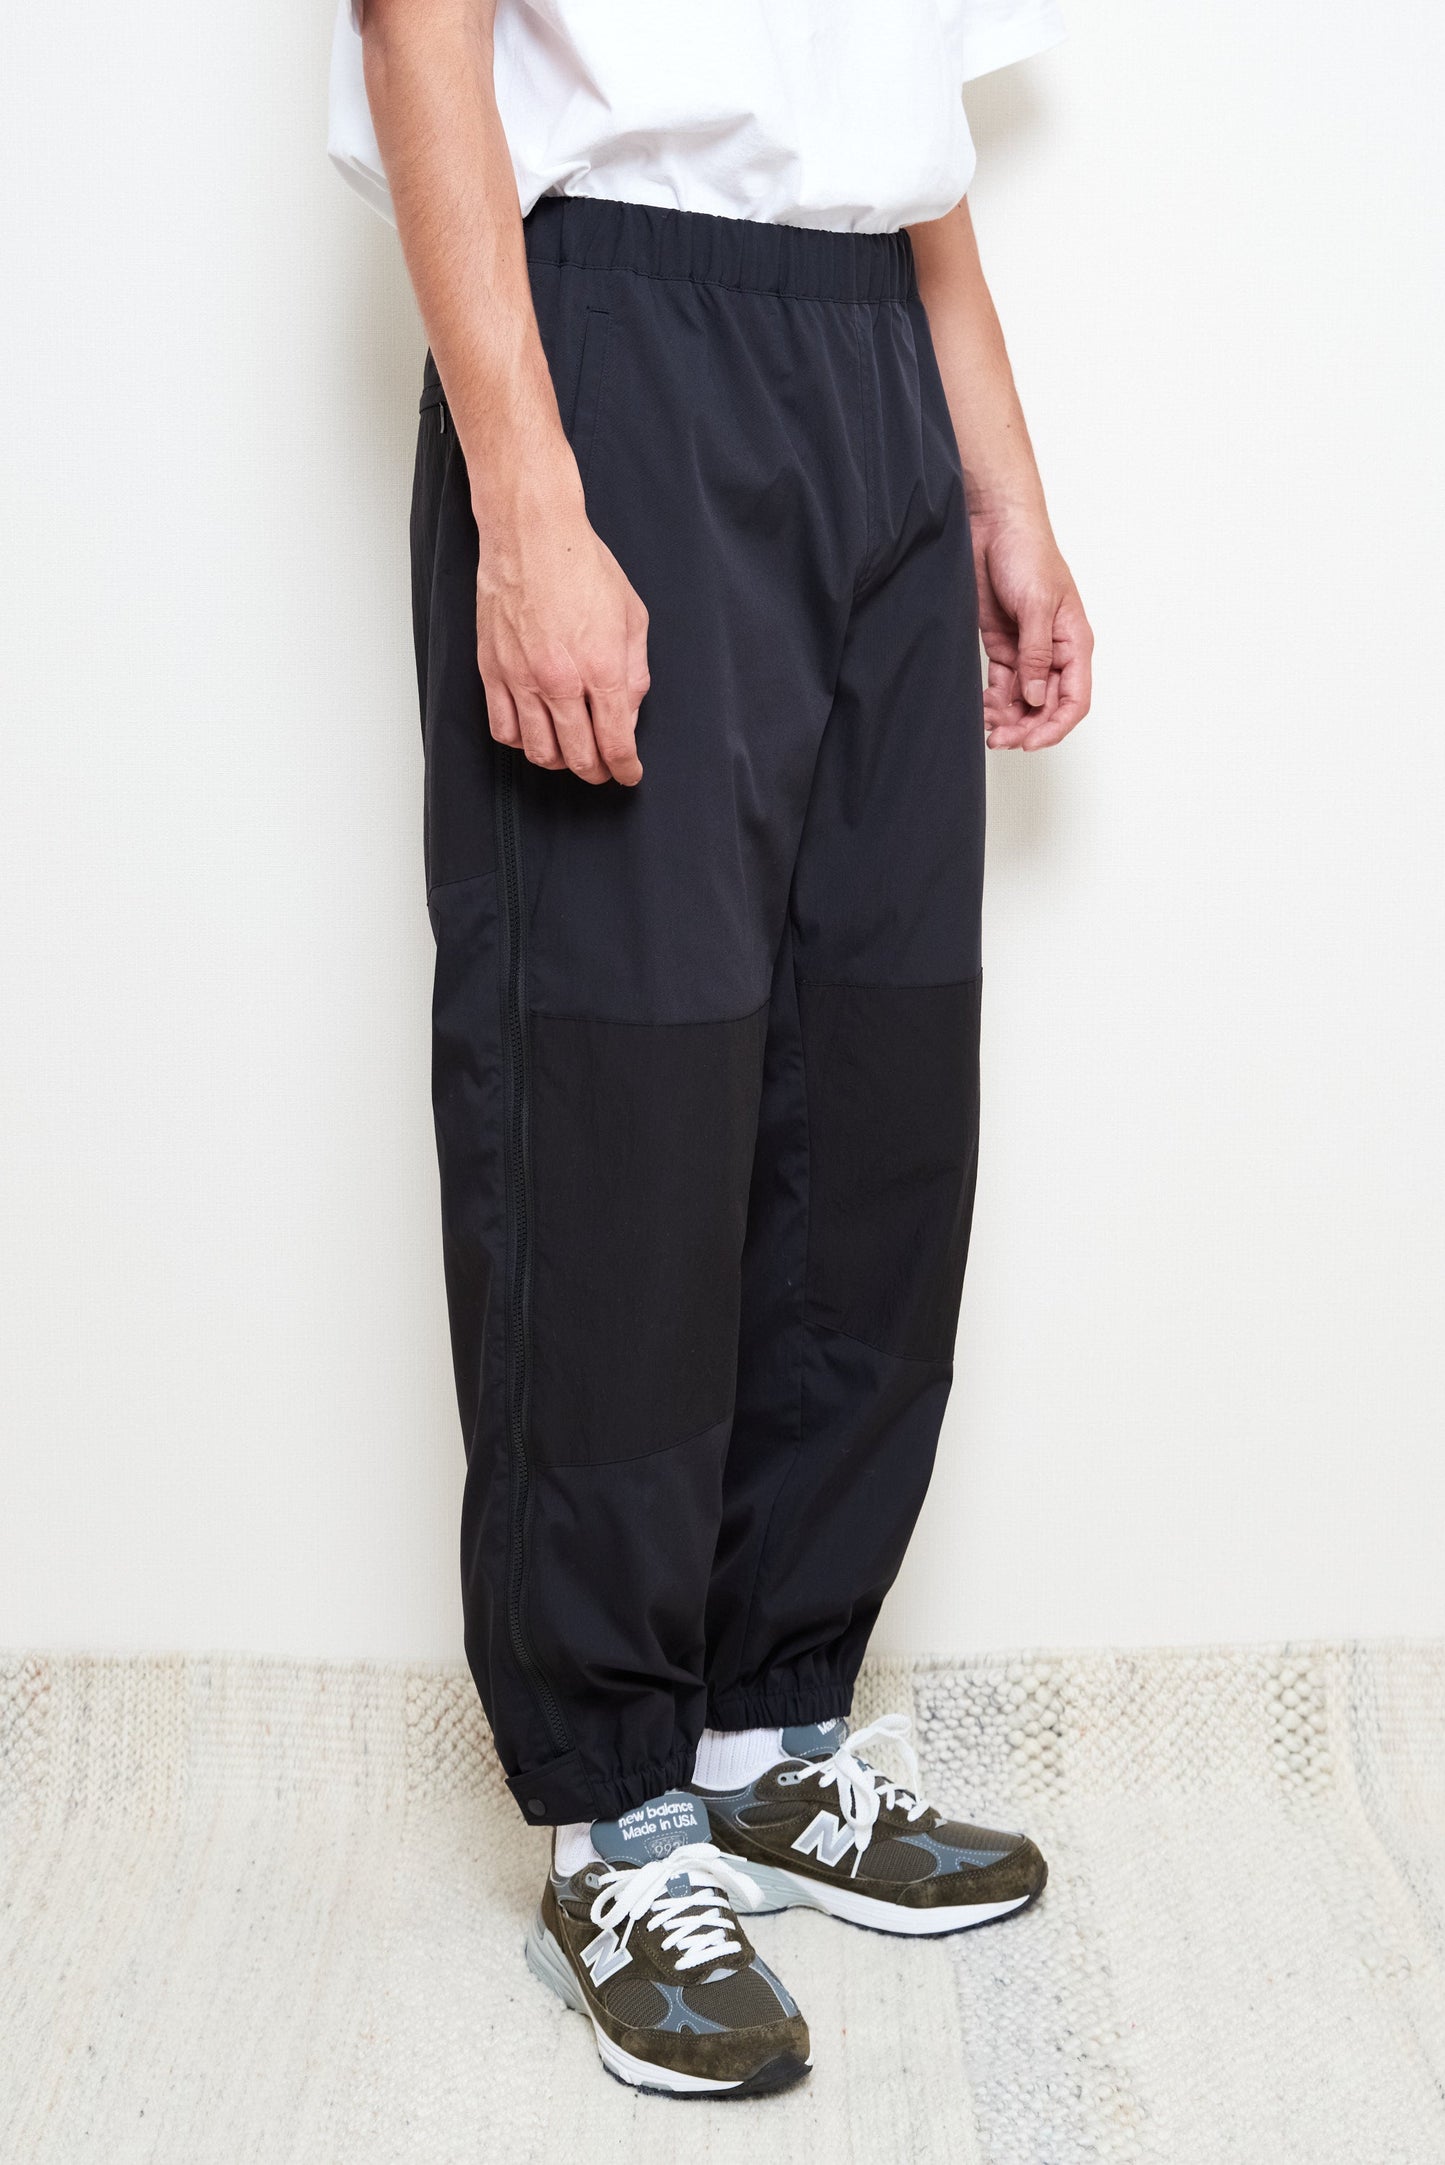 THE HOLY MOUNTAIN VENTILATION PANTS is-ness online shop 10